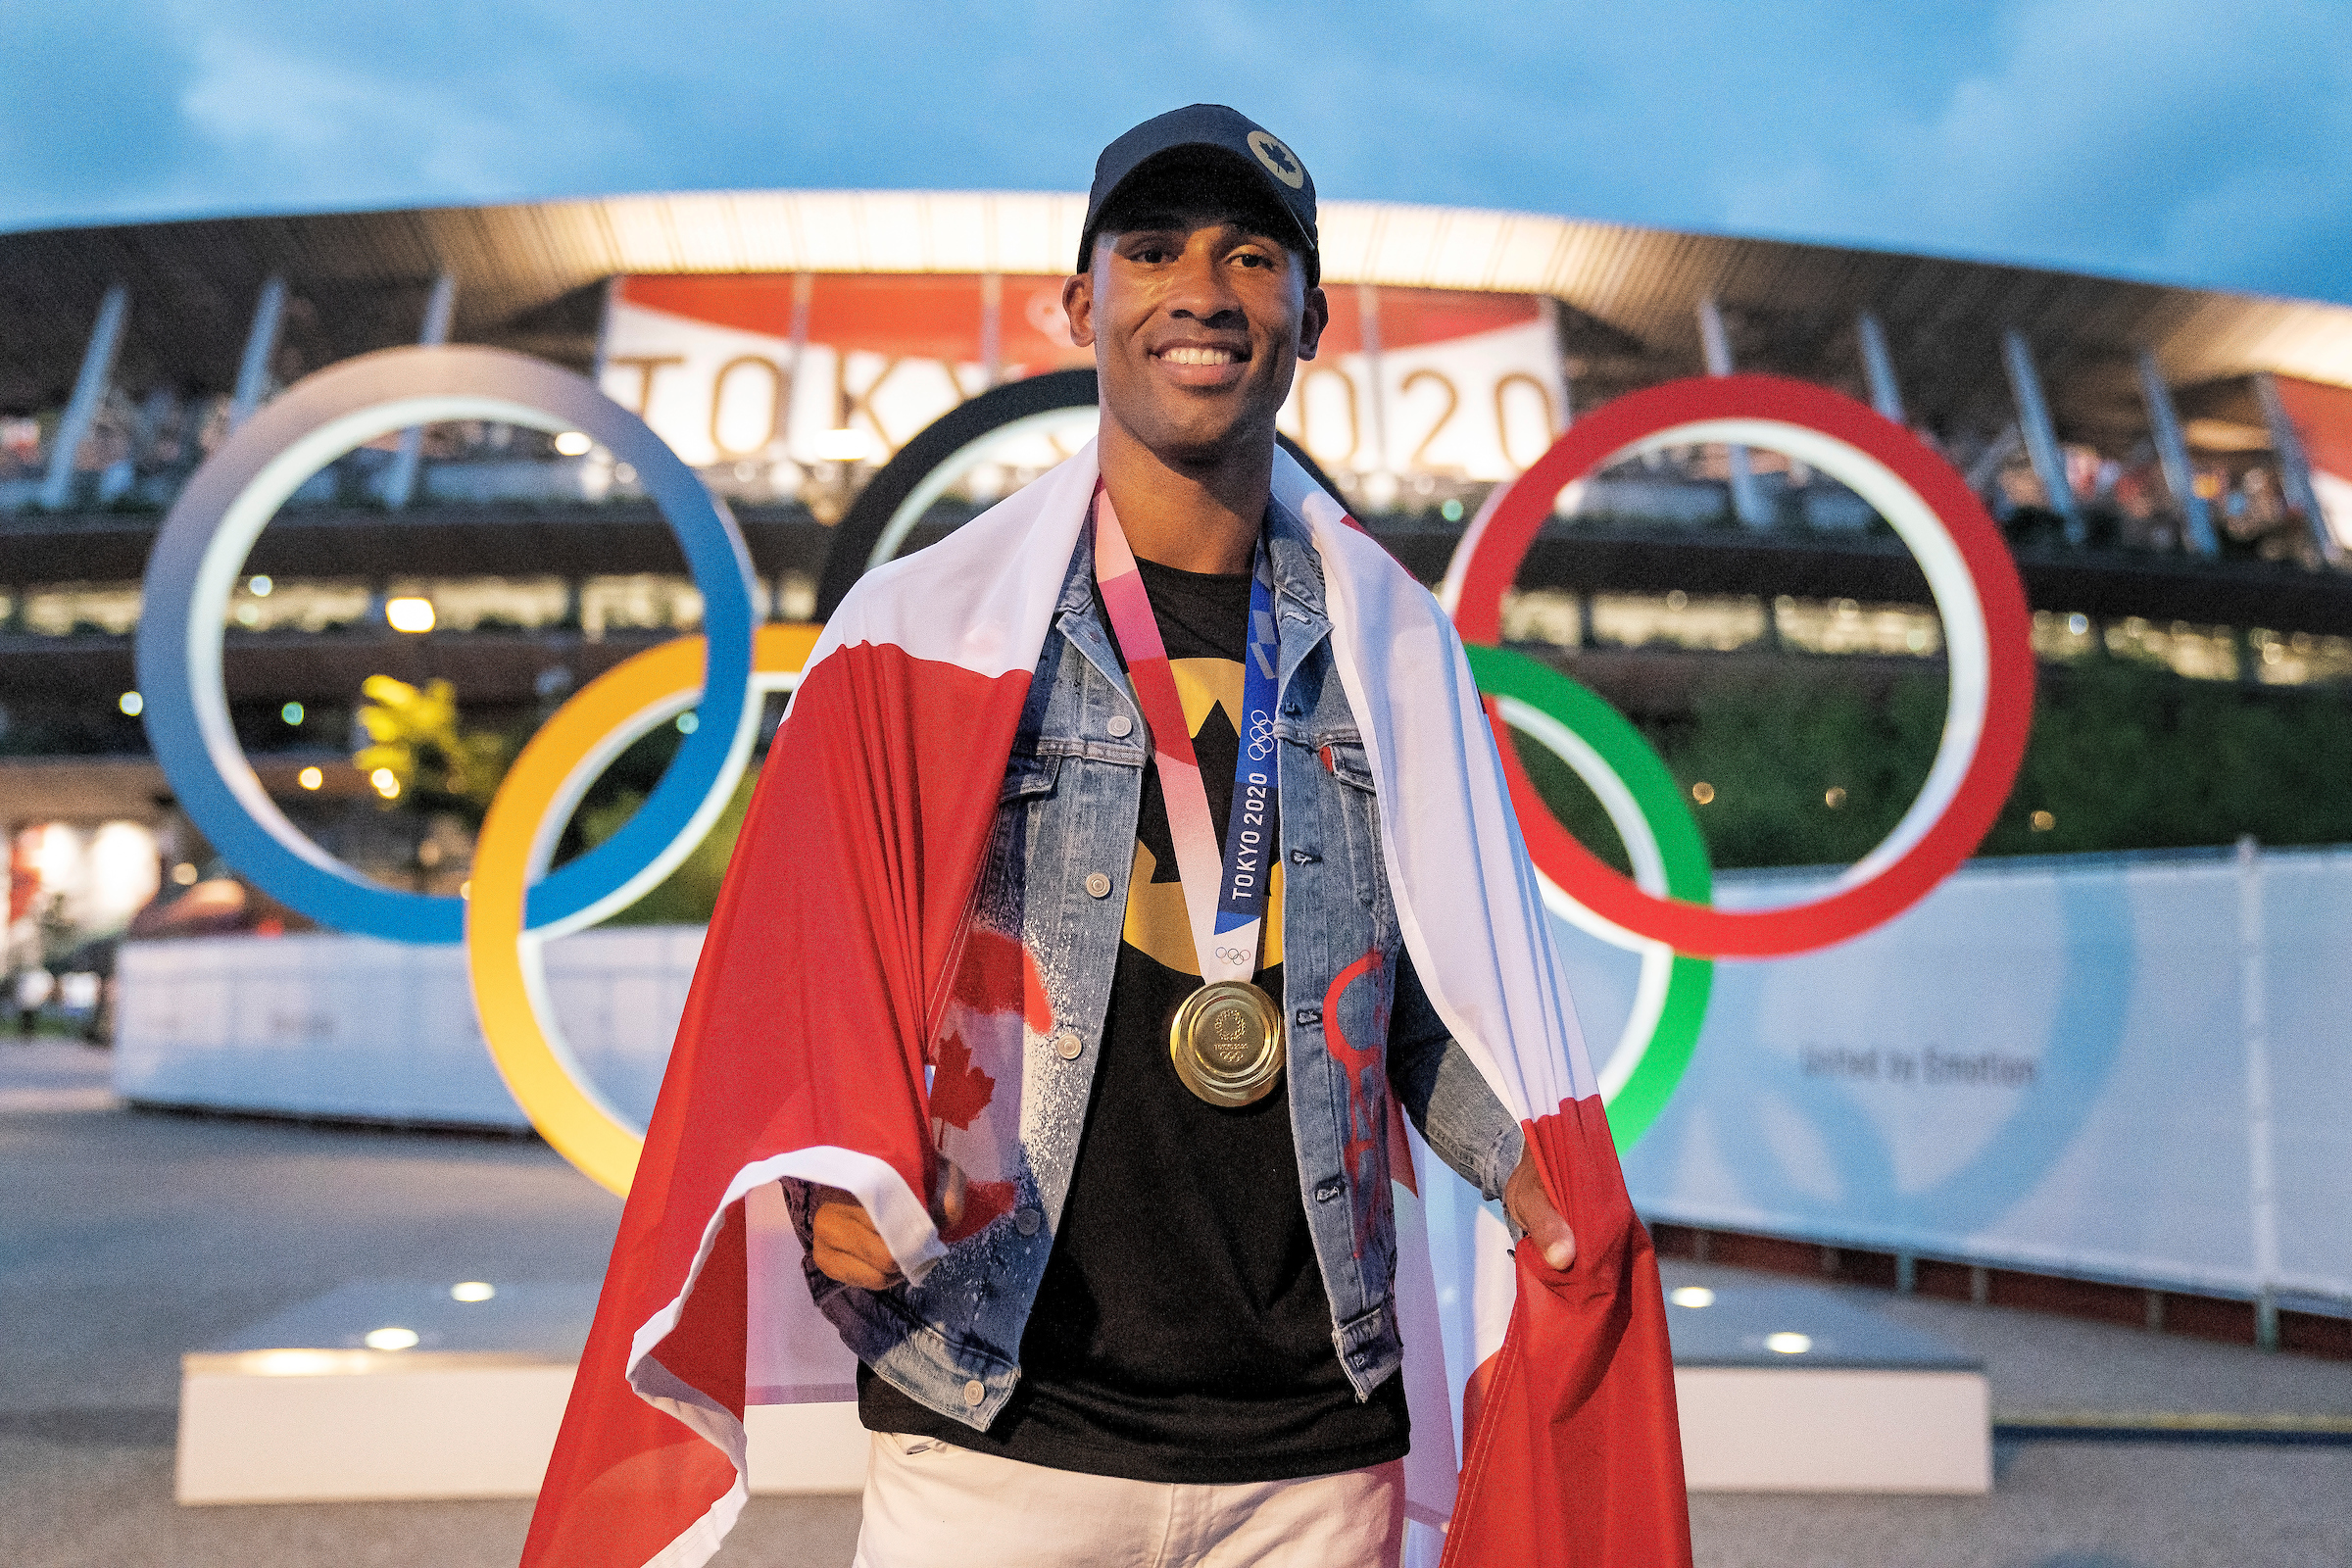 Damian Warner poses with the Canadian flag on his shoulders while wearing his gold medal